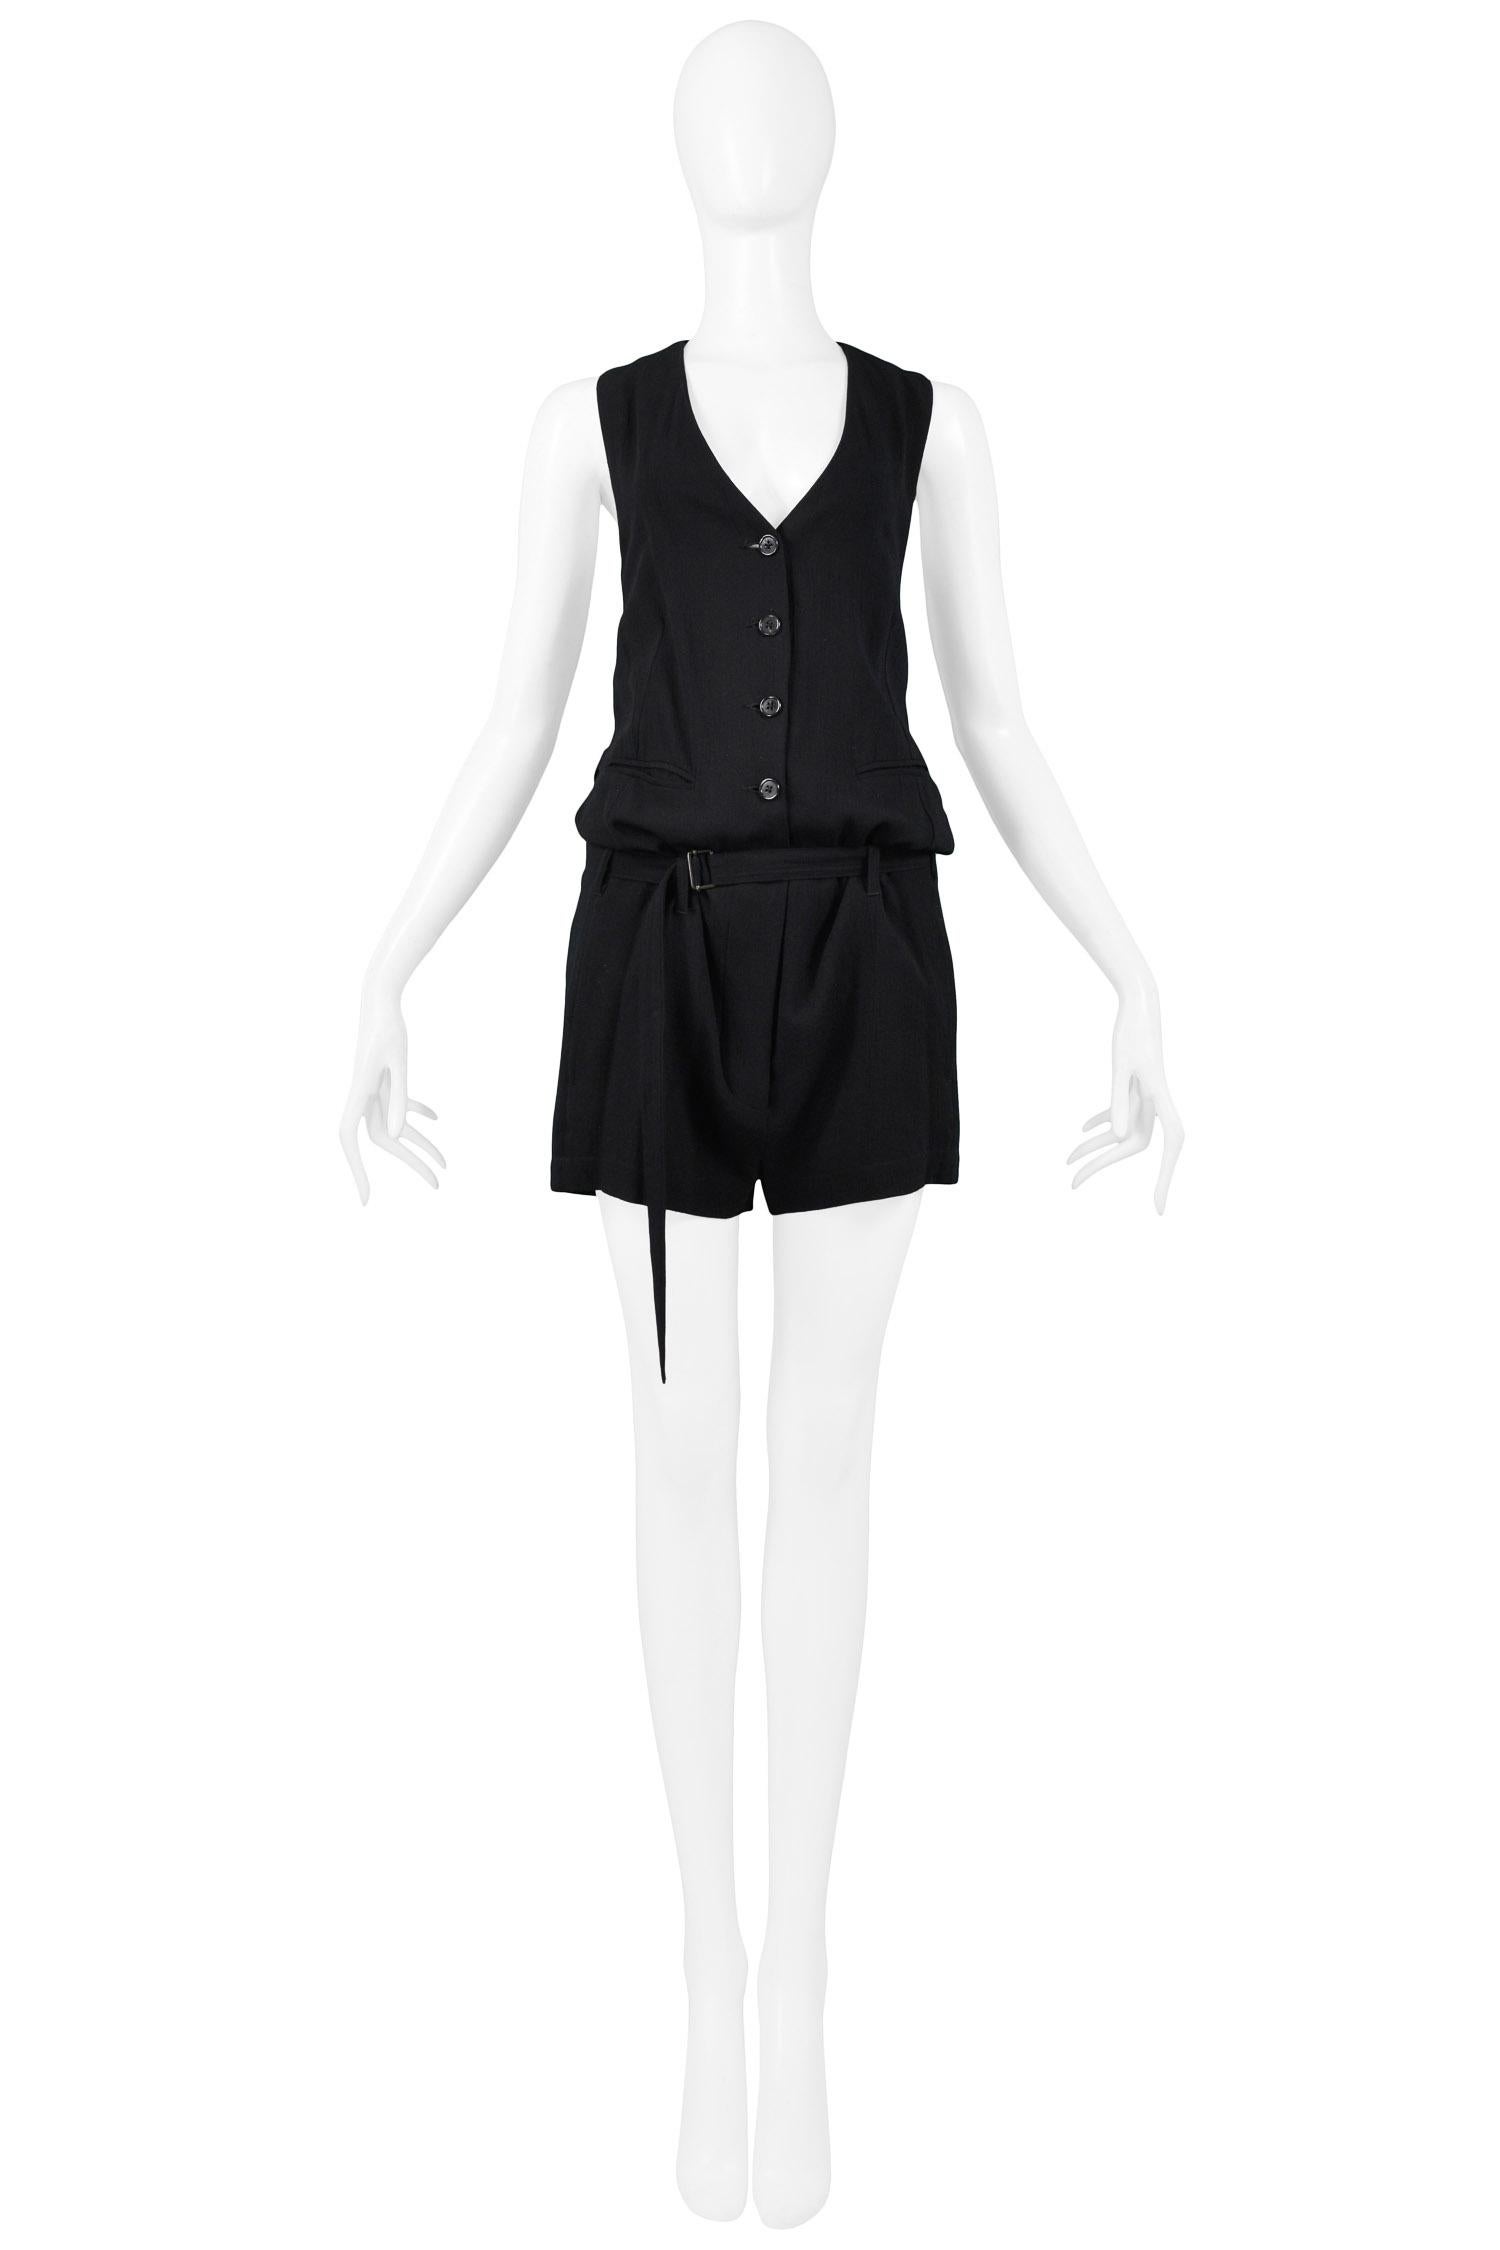 Vintage Ann Demeulemeester black sleeveless v-neck romper with buttons down center front, two front pockets and one back pocket, and adjustable straps at waist and at back.

Excellent Vintage Condition.

Size 36